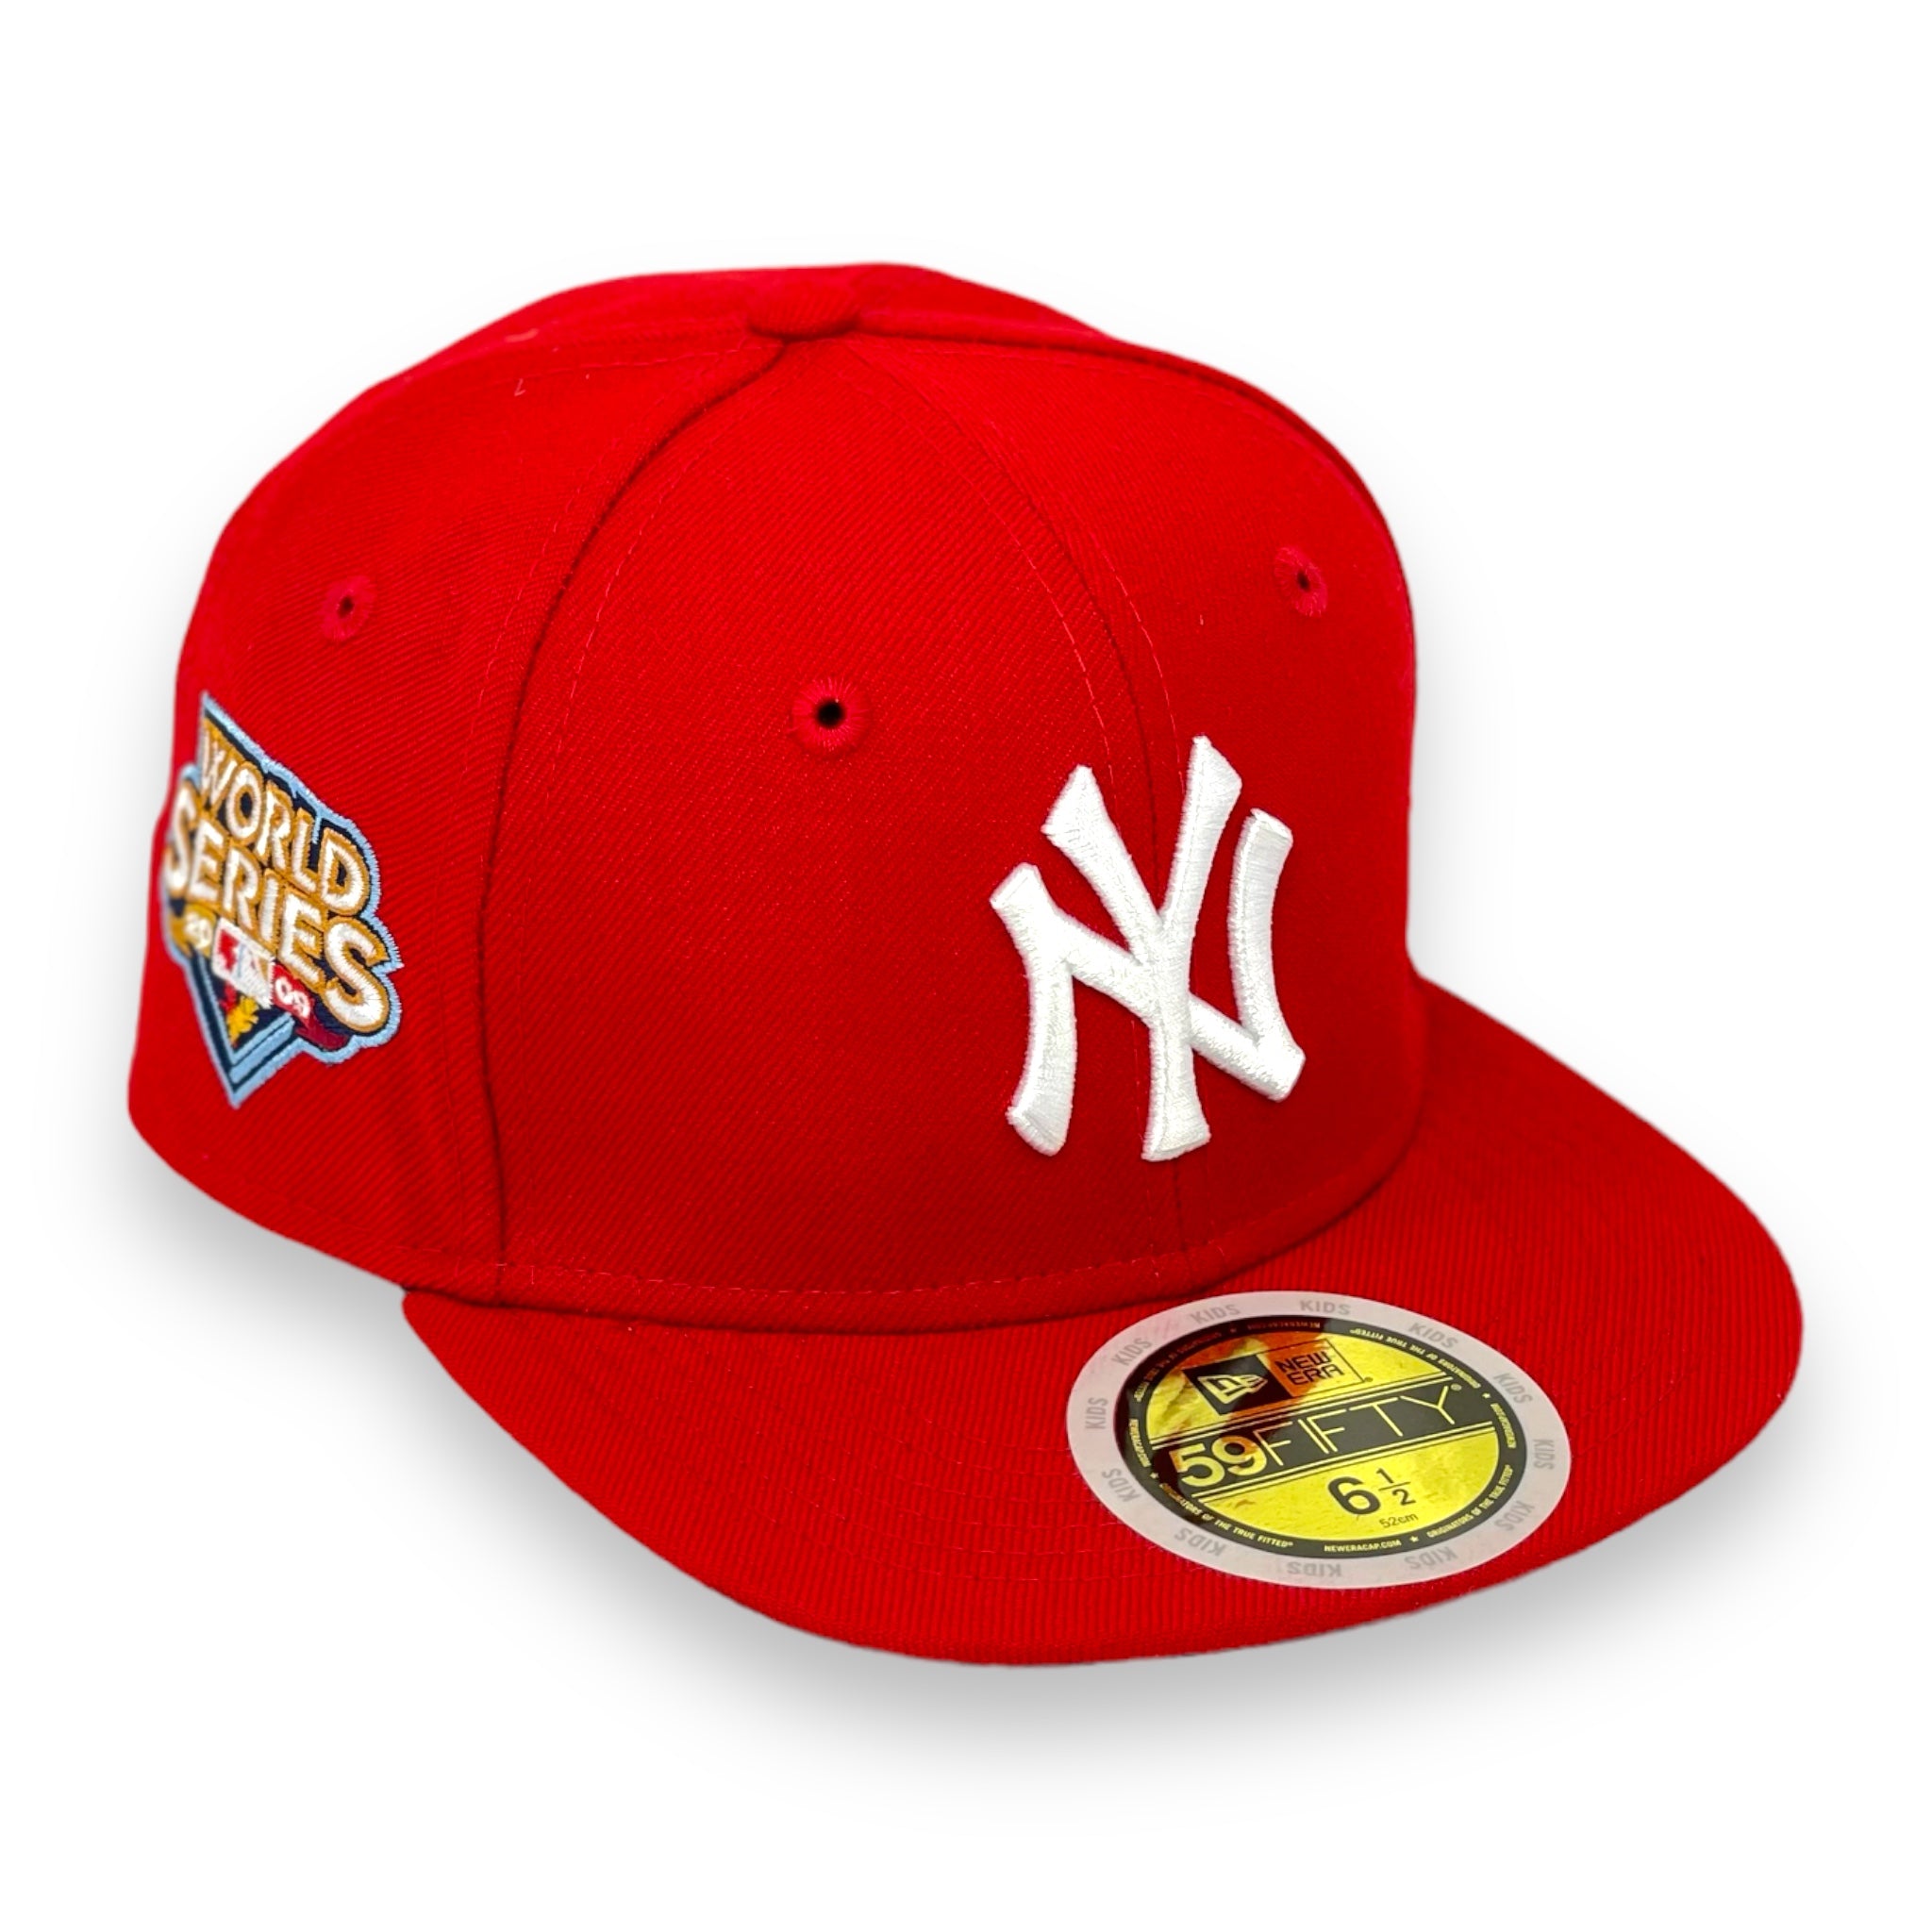 KIDS - NEW YORK YANKEES (RED) "2009 WORLDSERIES" NEW ERA 59FIFTY FITTED (SKY BLUE UNDER VISOR)